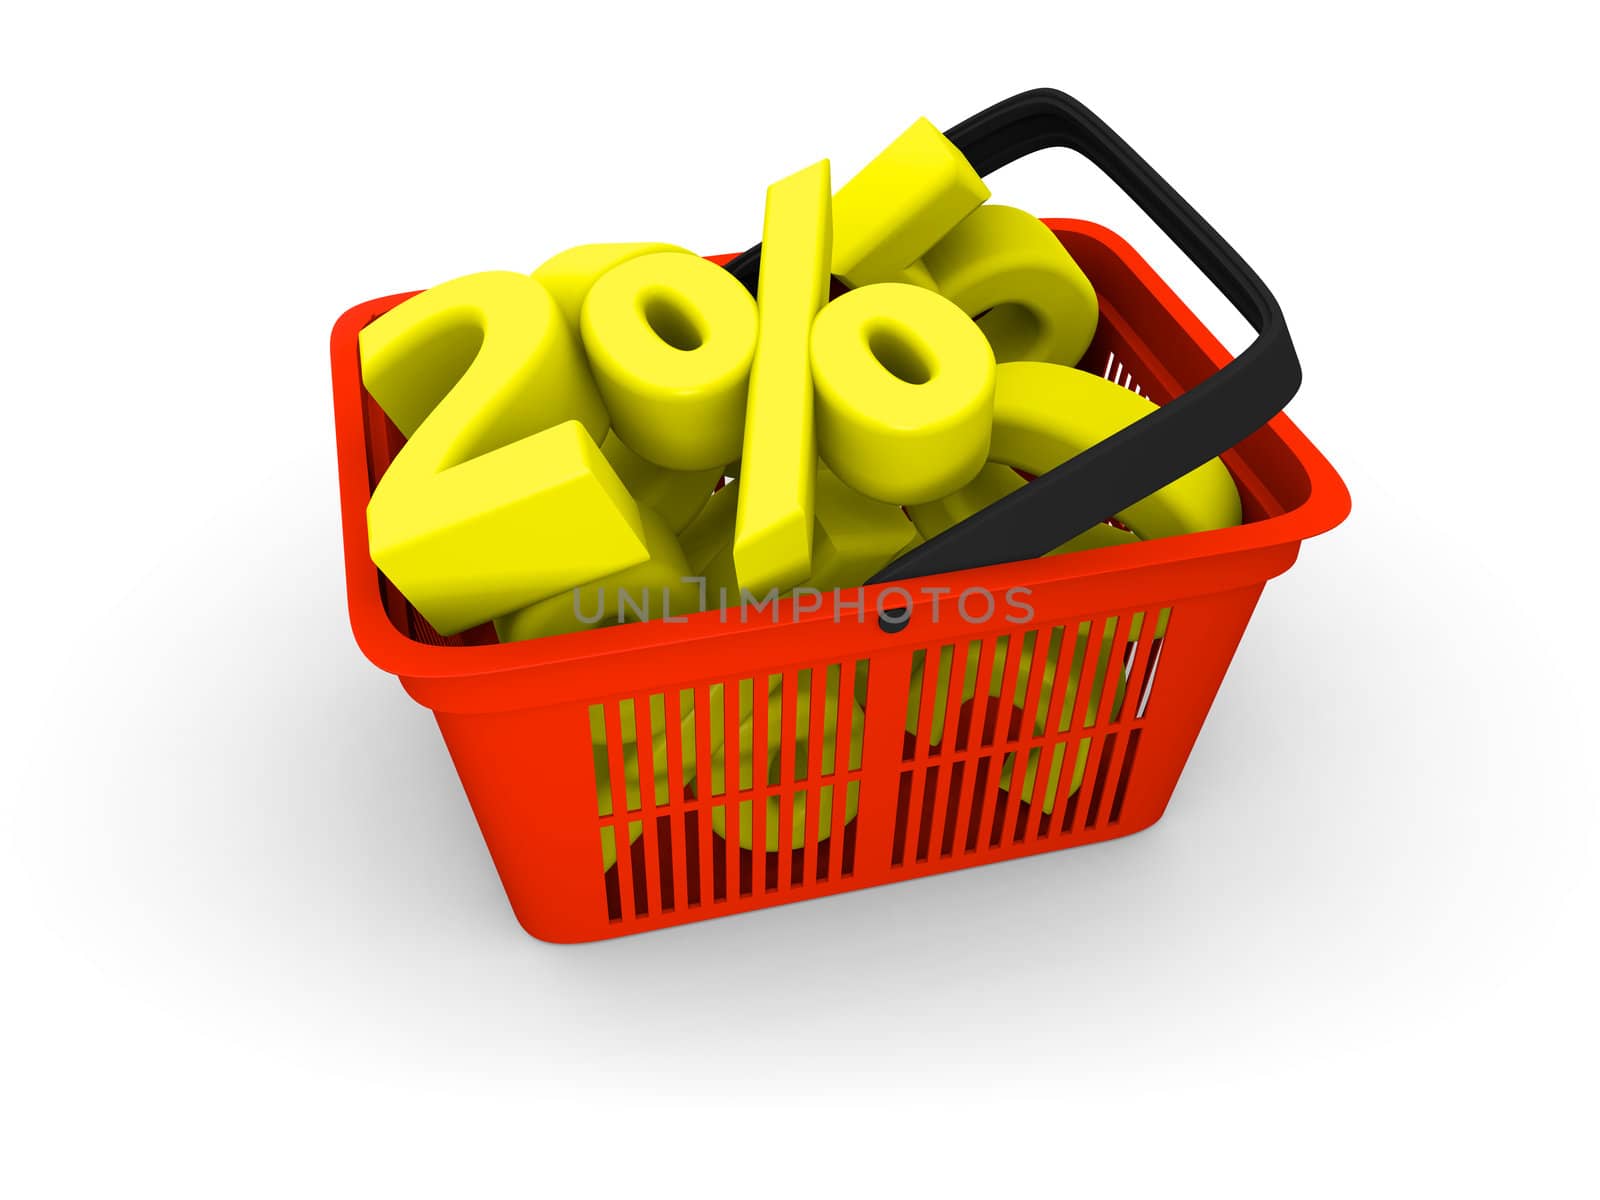 Shopping basket full of discounts by Harvepino